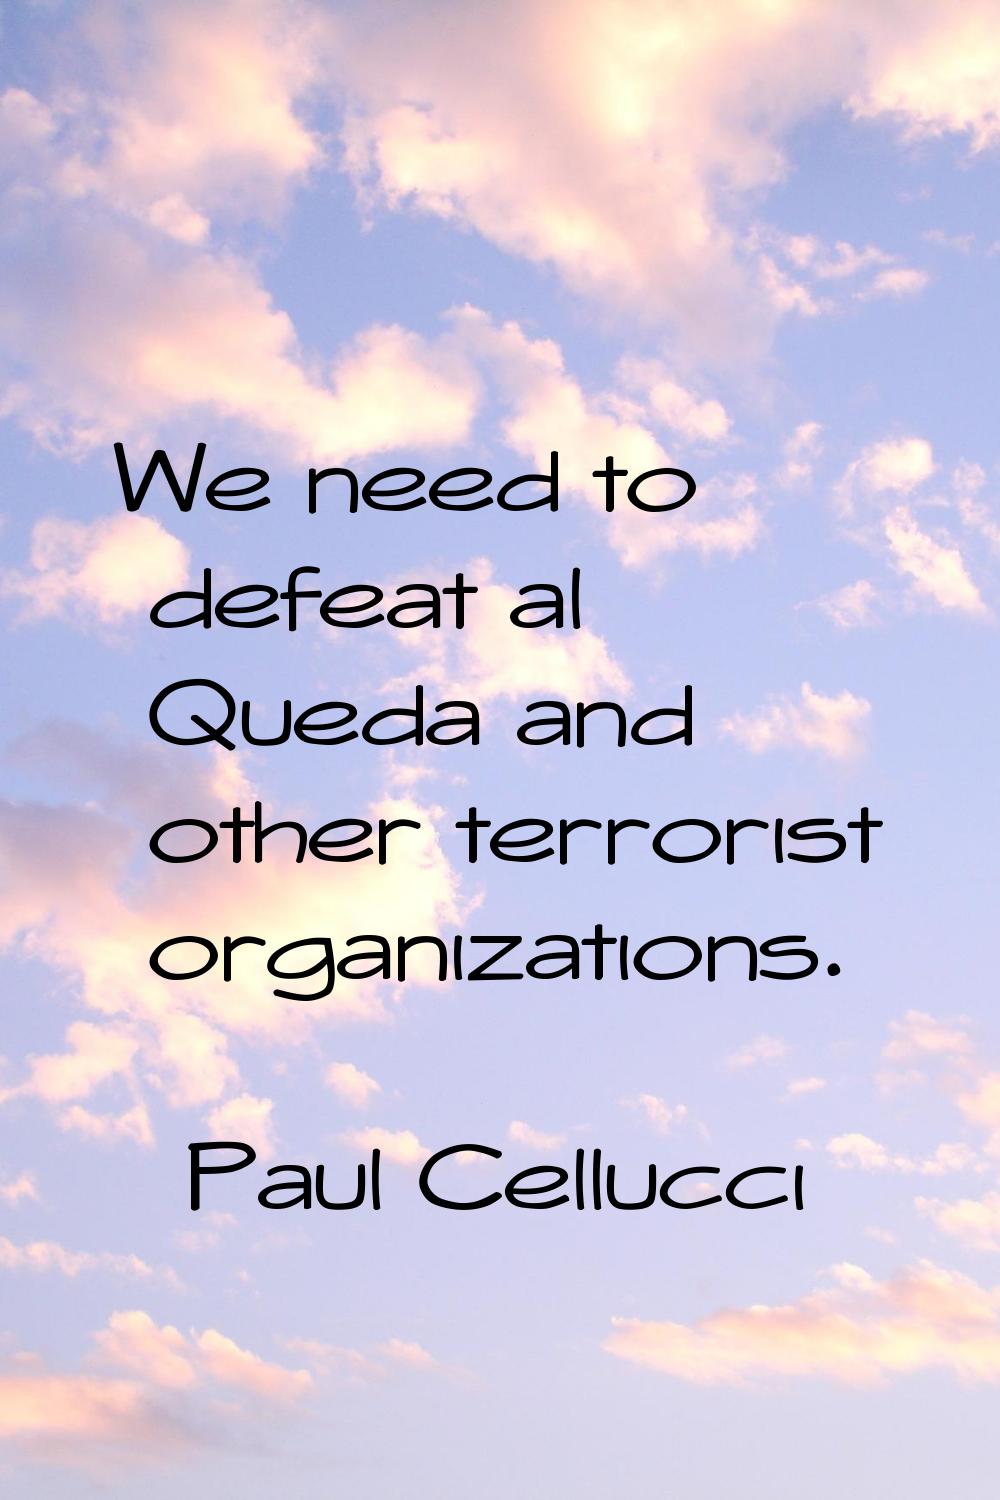 We need to defeat al Queda and other terrorist organizations.